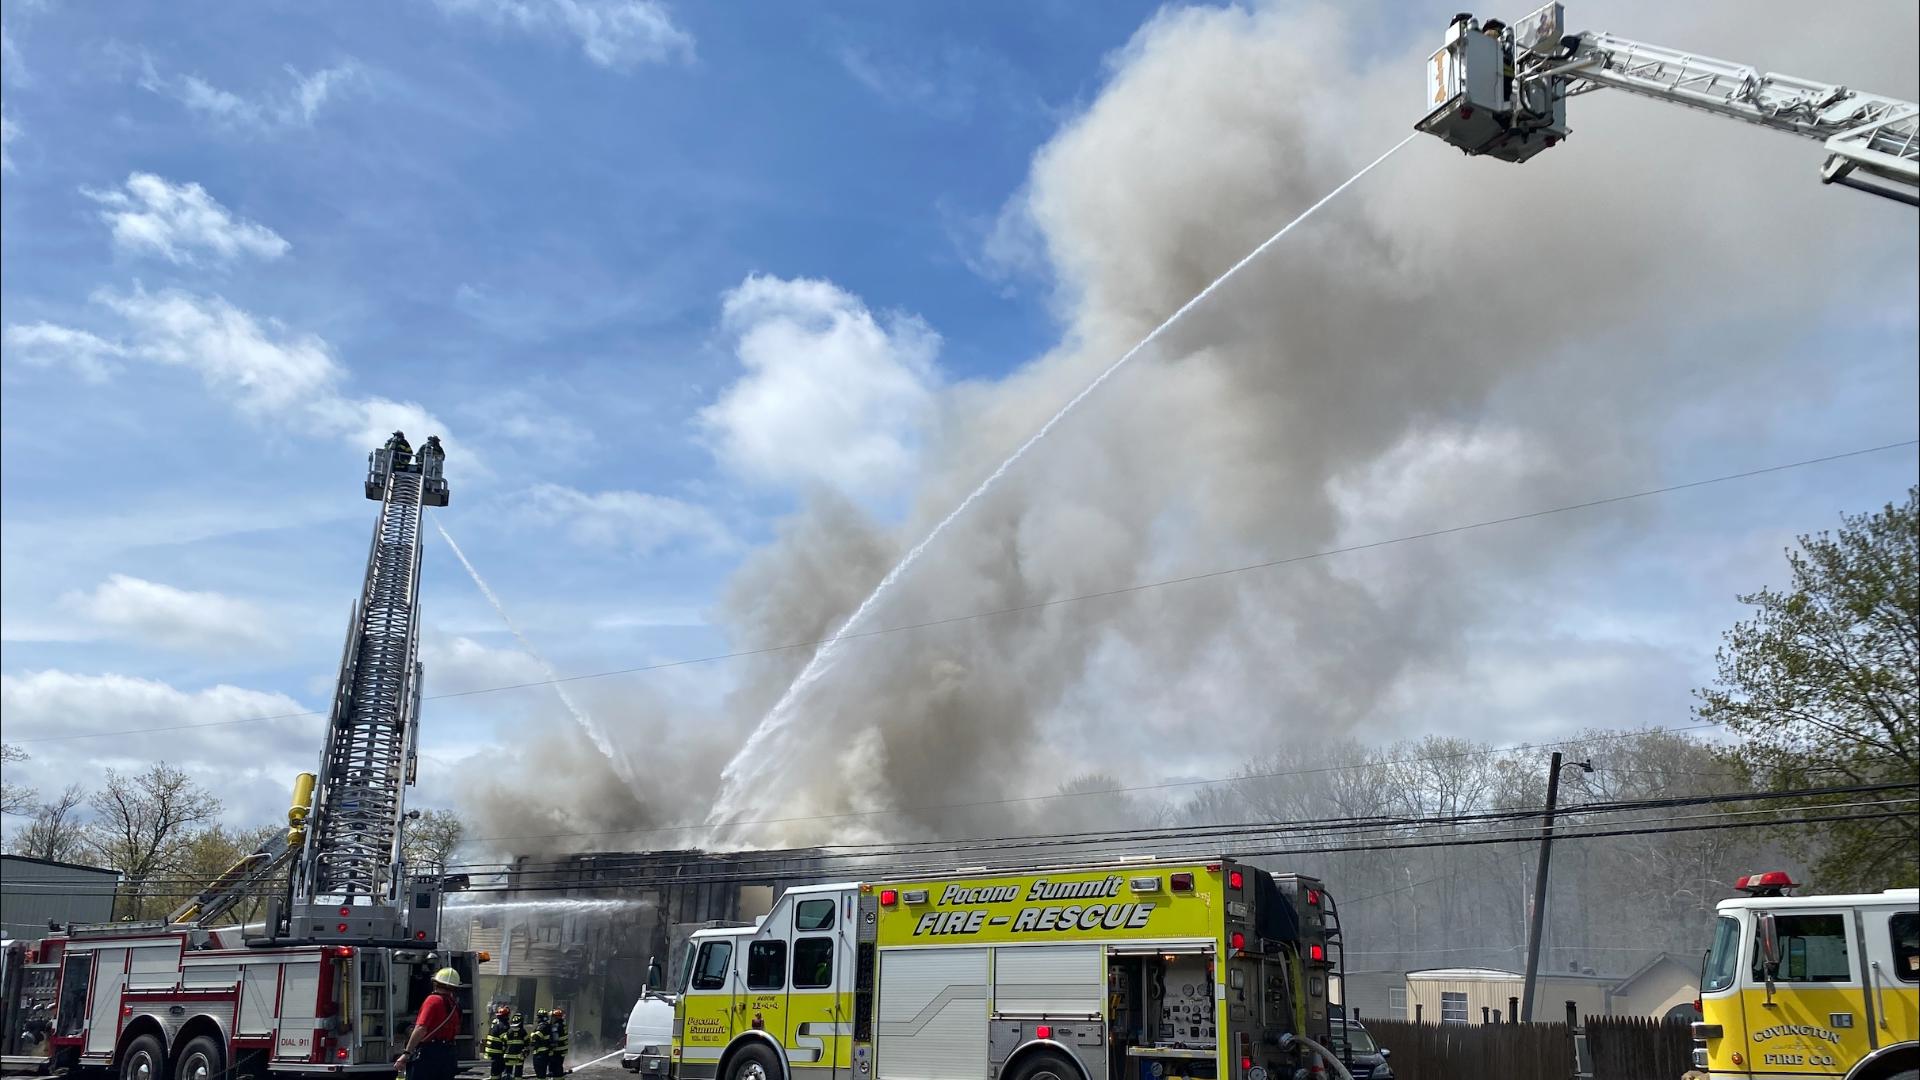 Flames at A&C Used Tires near Tobyhanna broke out around 10 a.m. Friday.